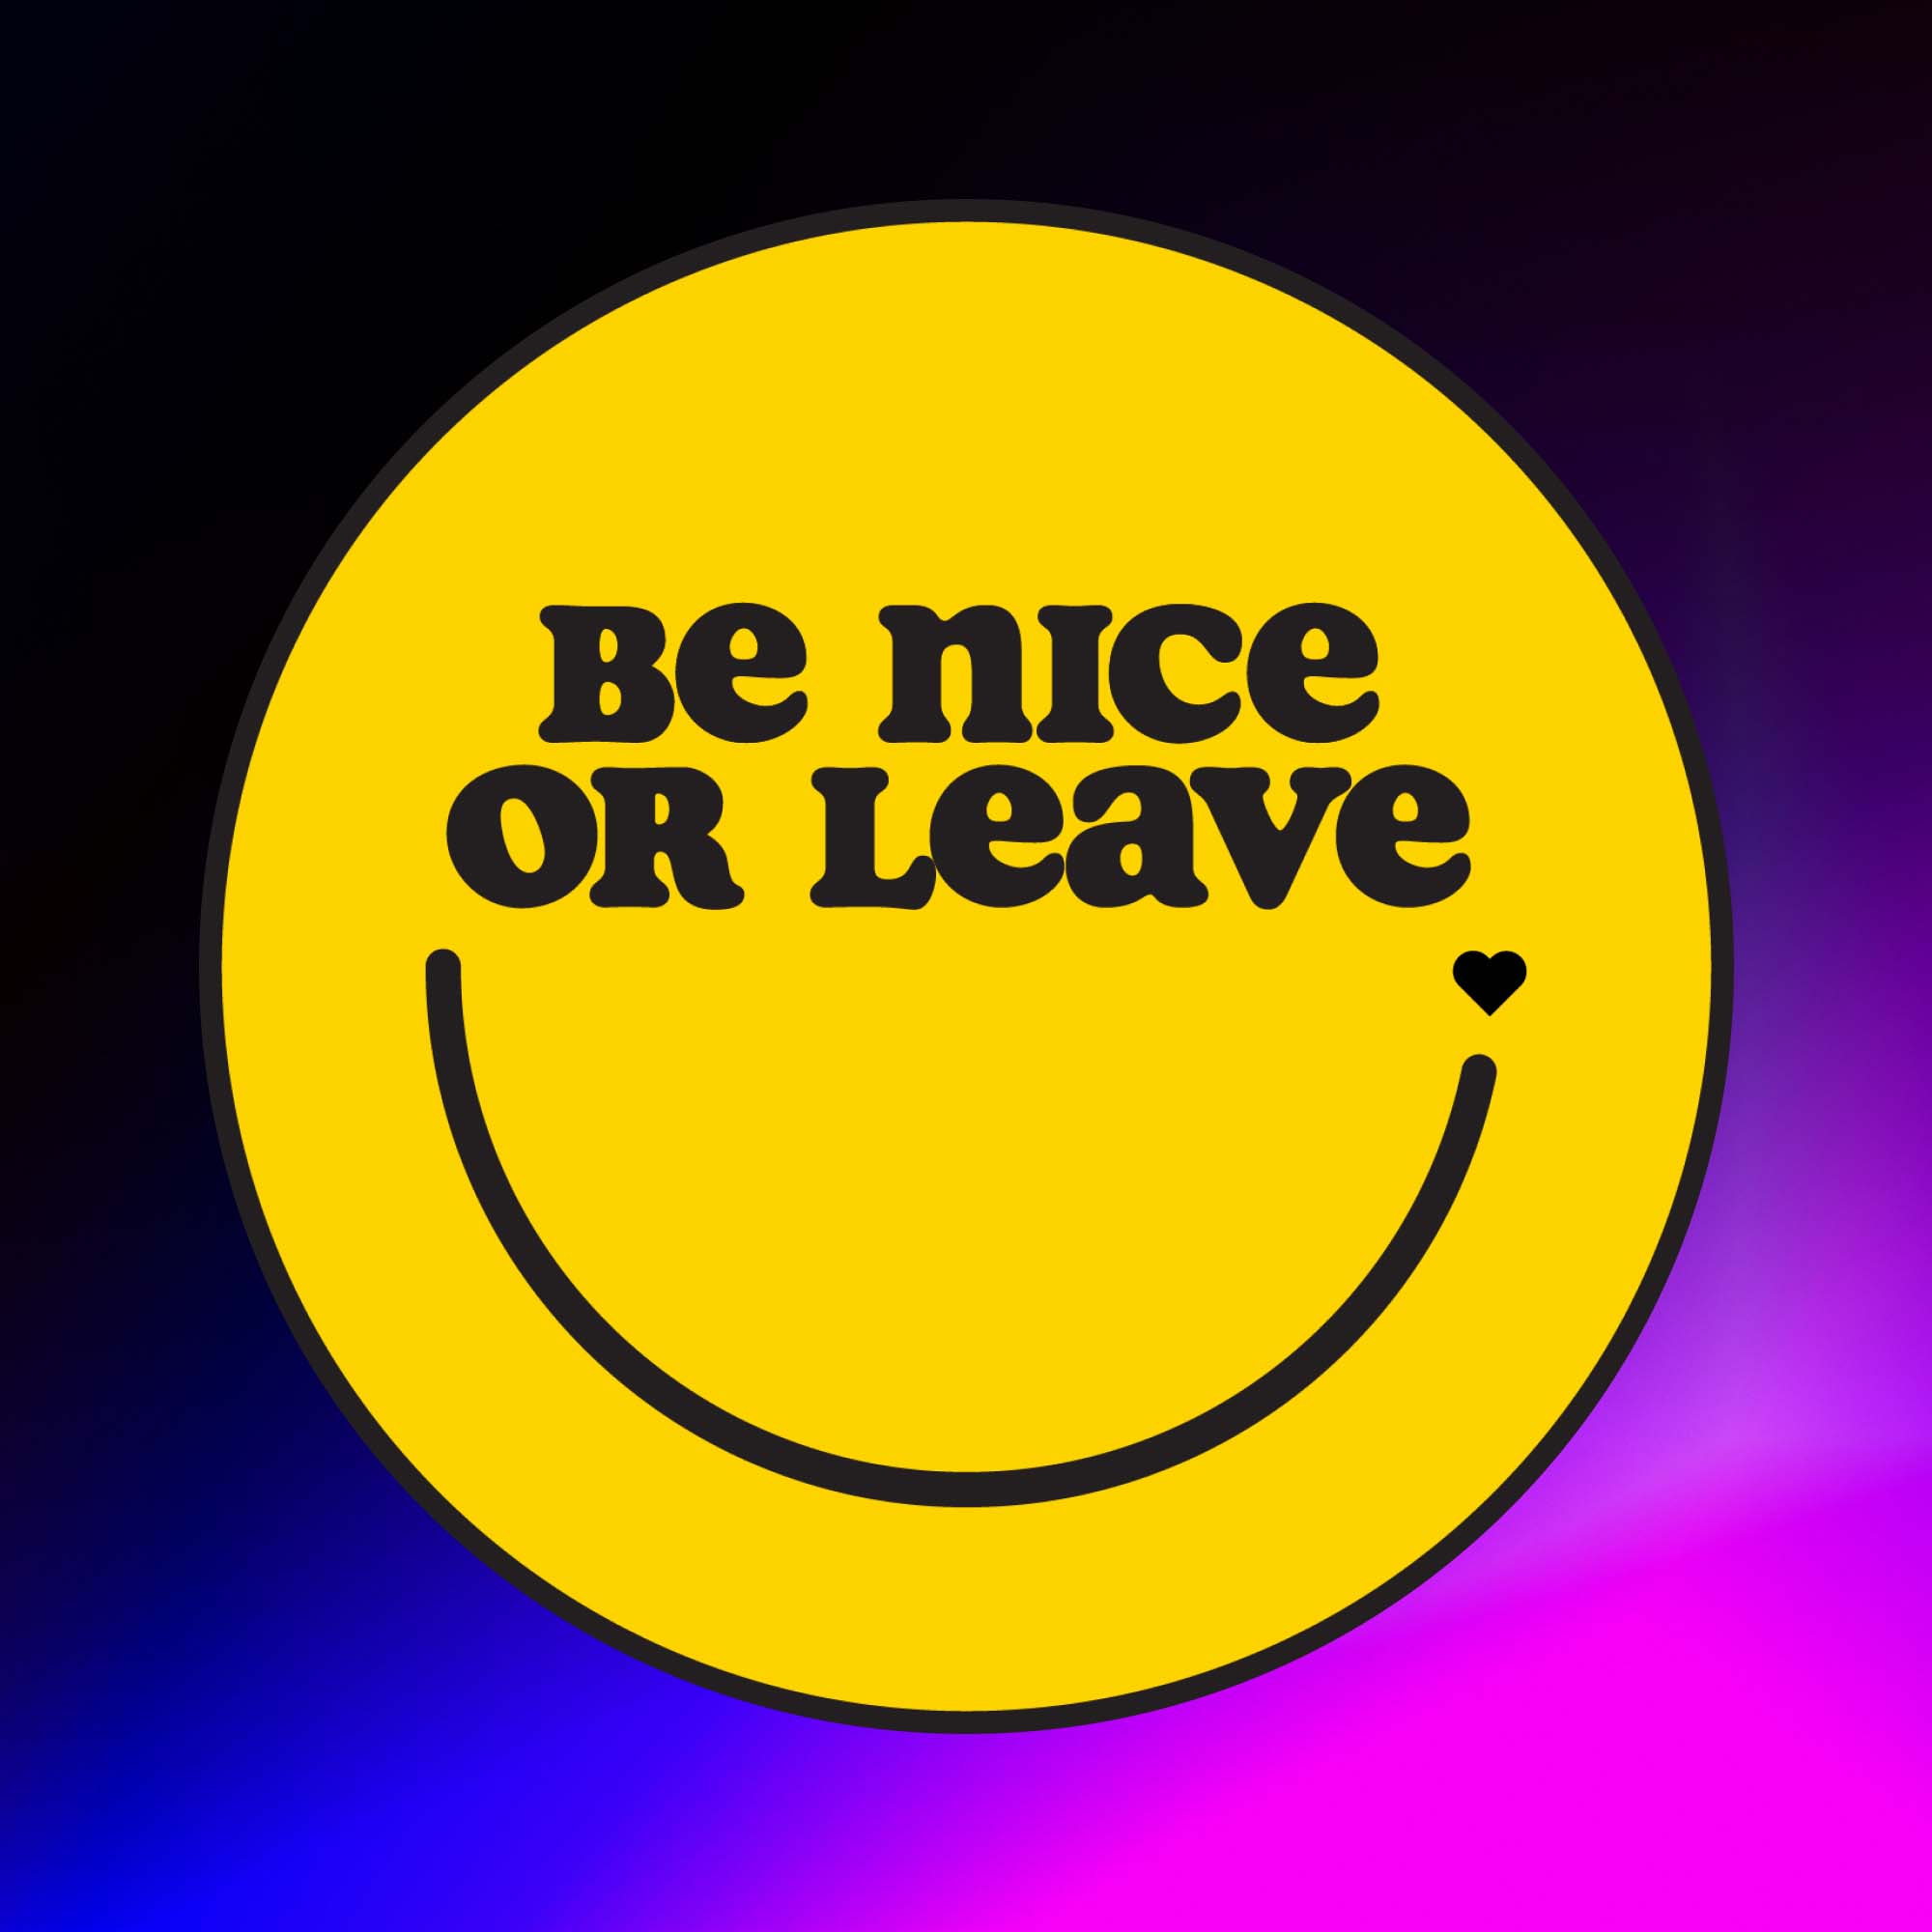 Bright yellow smiley face with the text "Be Nice or Leave"